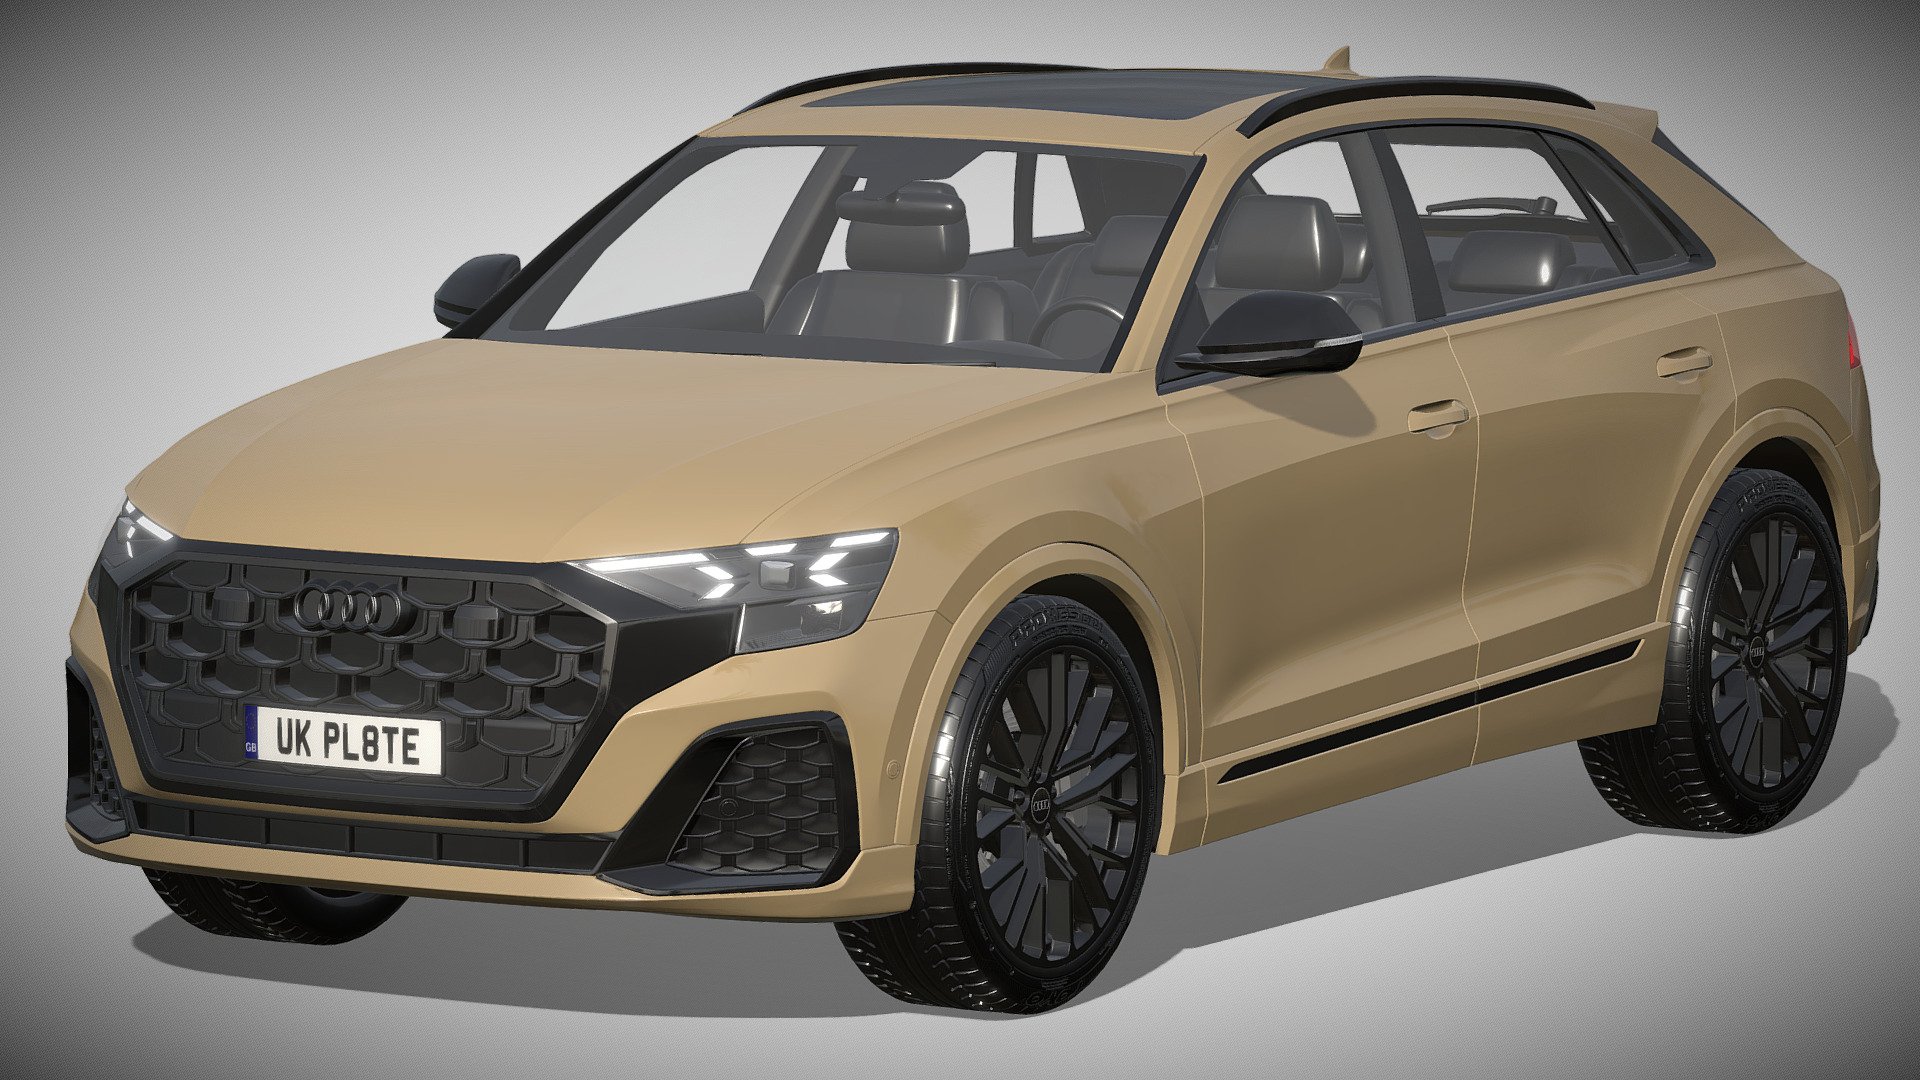 Audi Q8 2024

https://www.audi.de/de/brand/de/neuwagen/q8/q8-suv.html

Clean geometry Light weight model, yet completely detailed for HI-Res renders. Use for movies, Advertisements or games

Corona render and materials

All textures include in *.rar files

Lighting setup is not included in the file! - Audi Q8 2024 - Buy Royalty Free 3D model by zifir3d 3d model